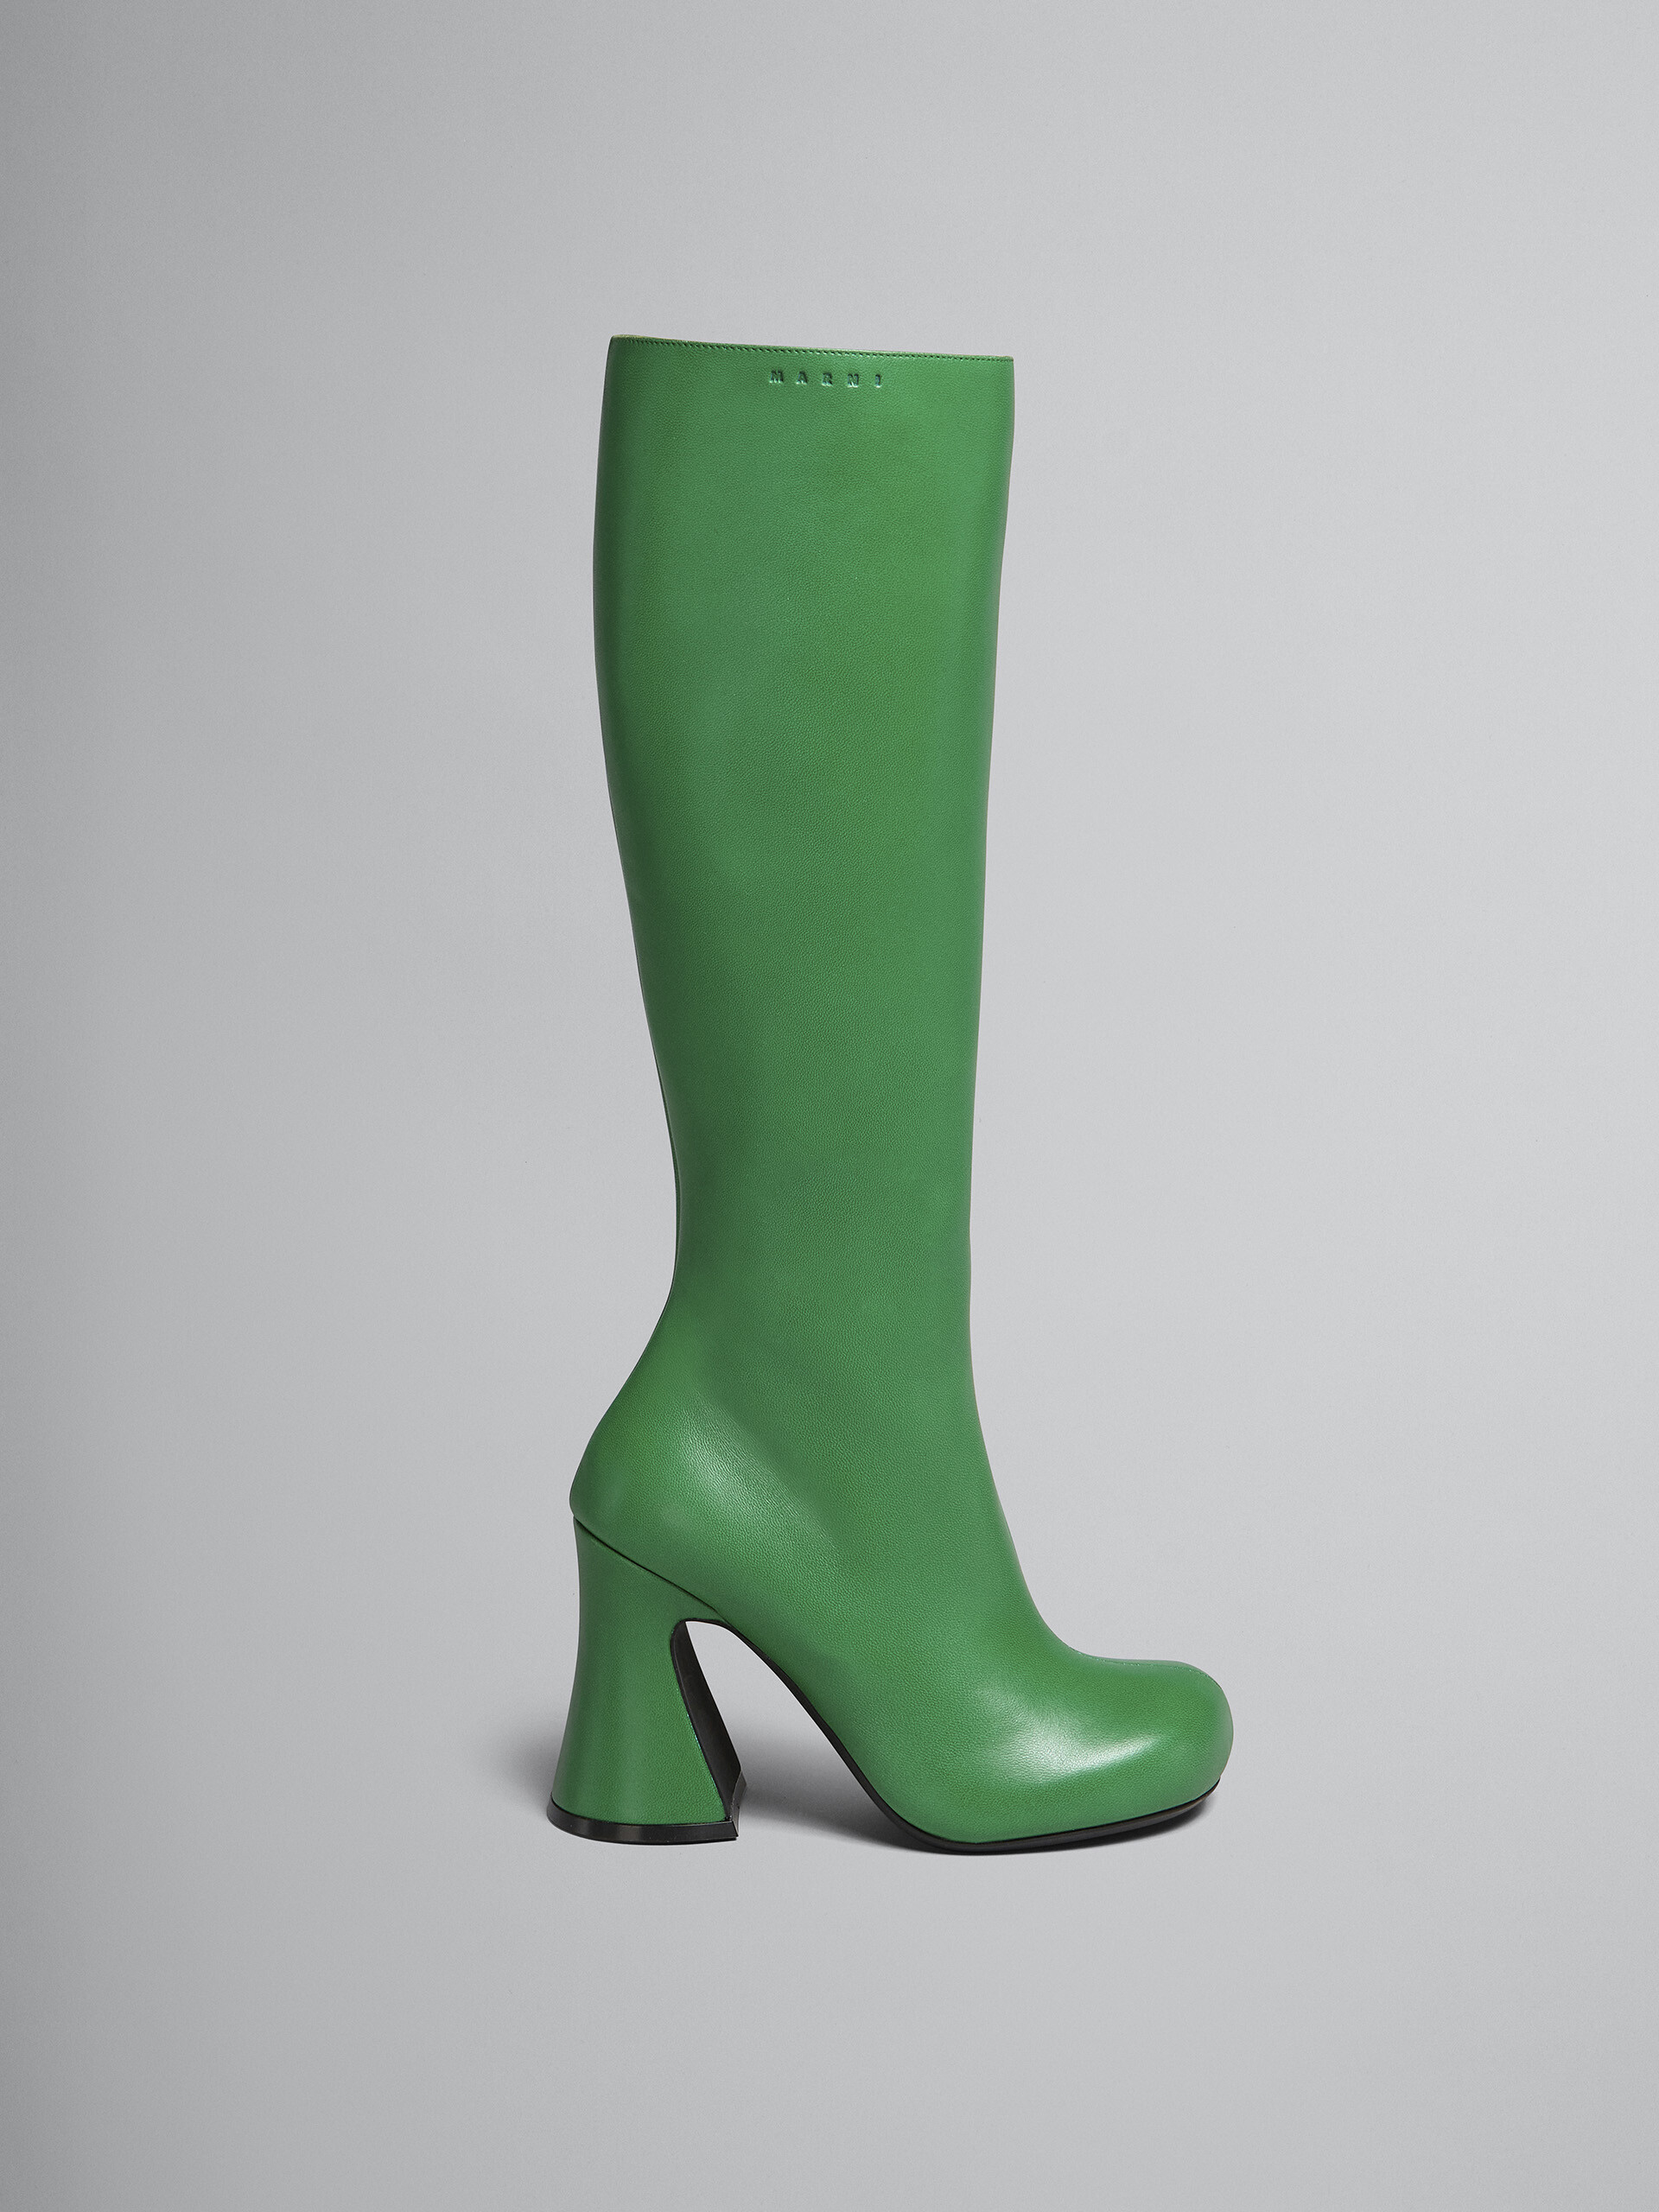 Green leather boot - Boots - Image 1